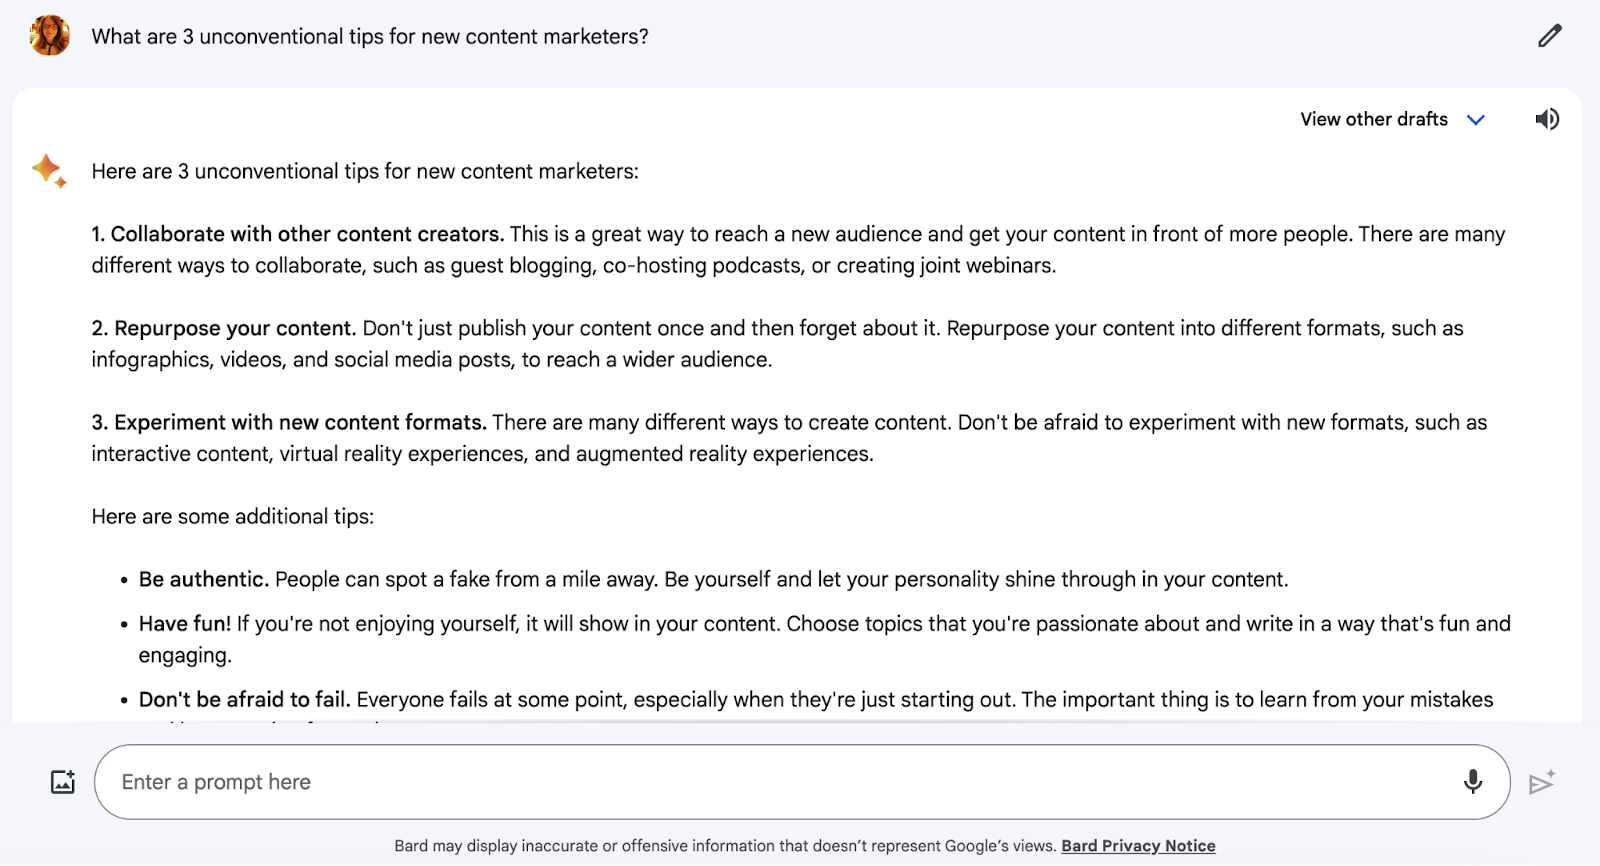 Bard's response to "What are 3 unconventional tips for new content marketers?" query